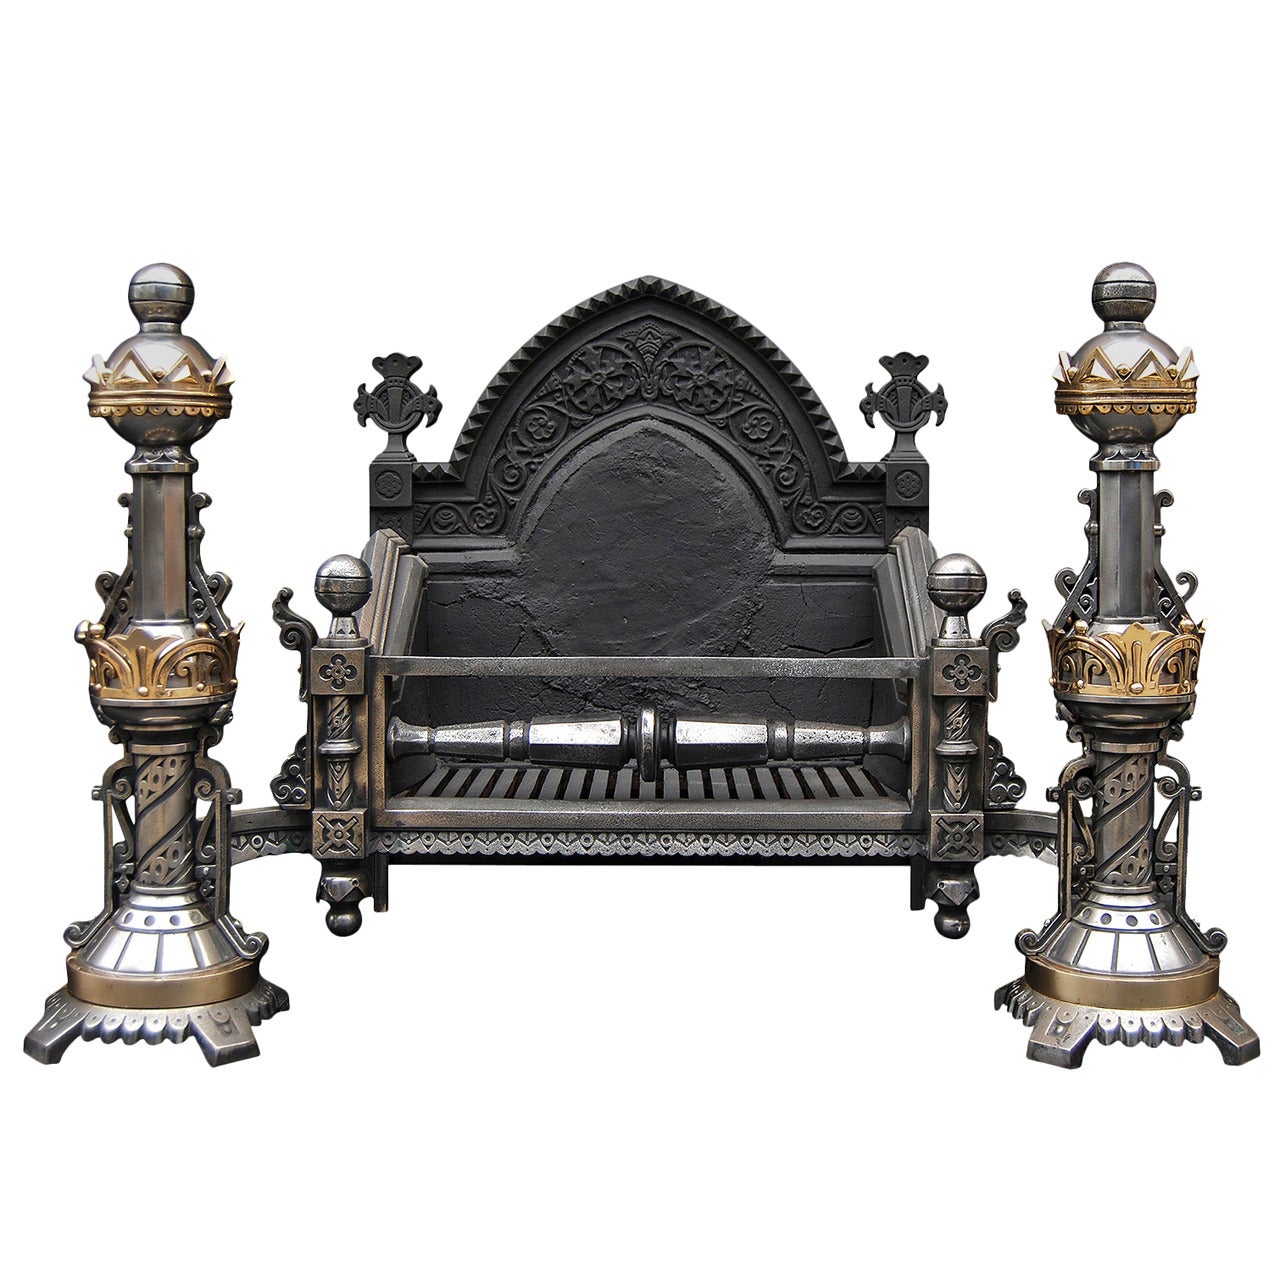 Very Impressive Gothic Revival Brass and Polished Steel Firegrate For Sale